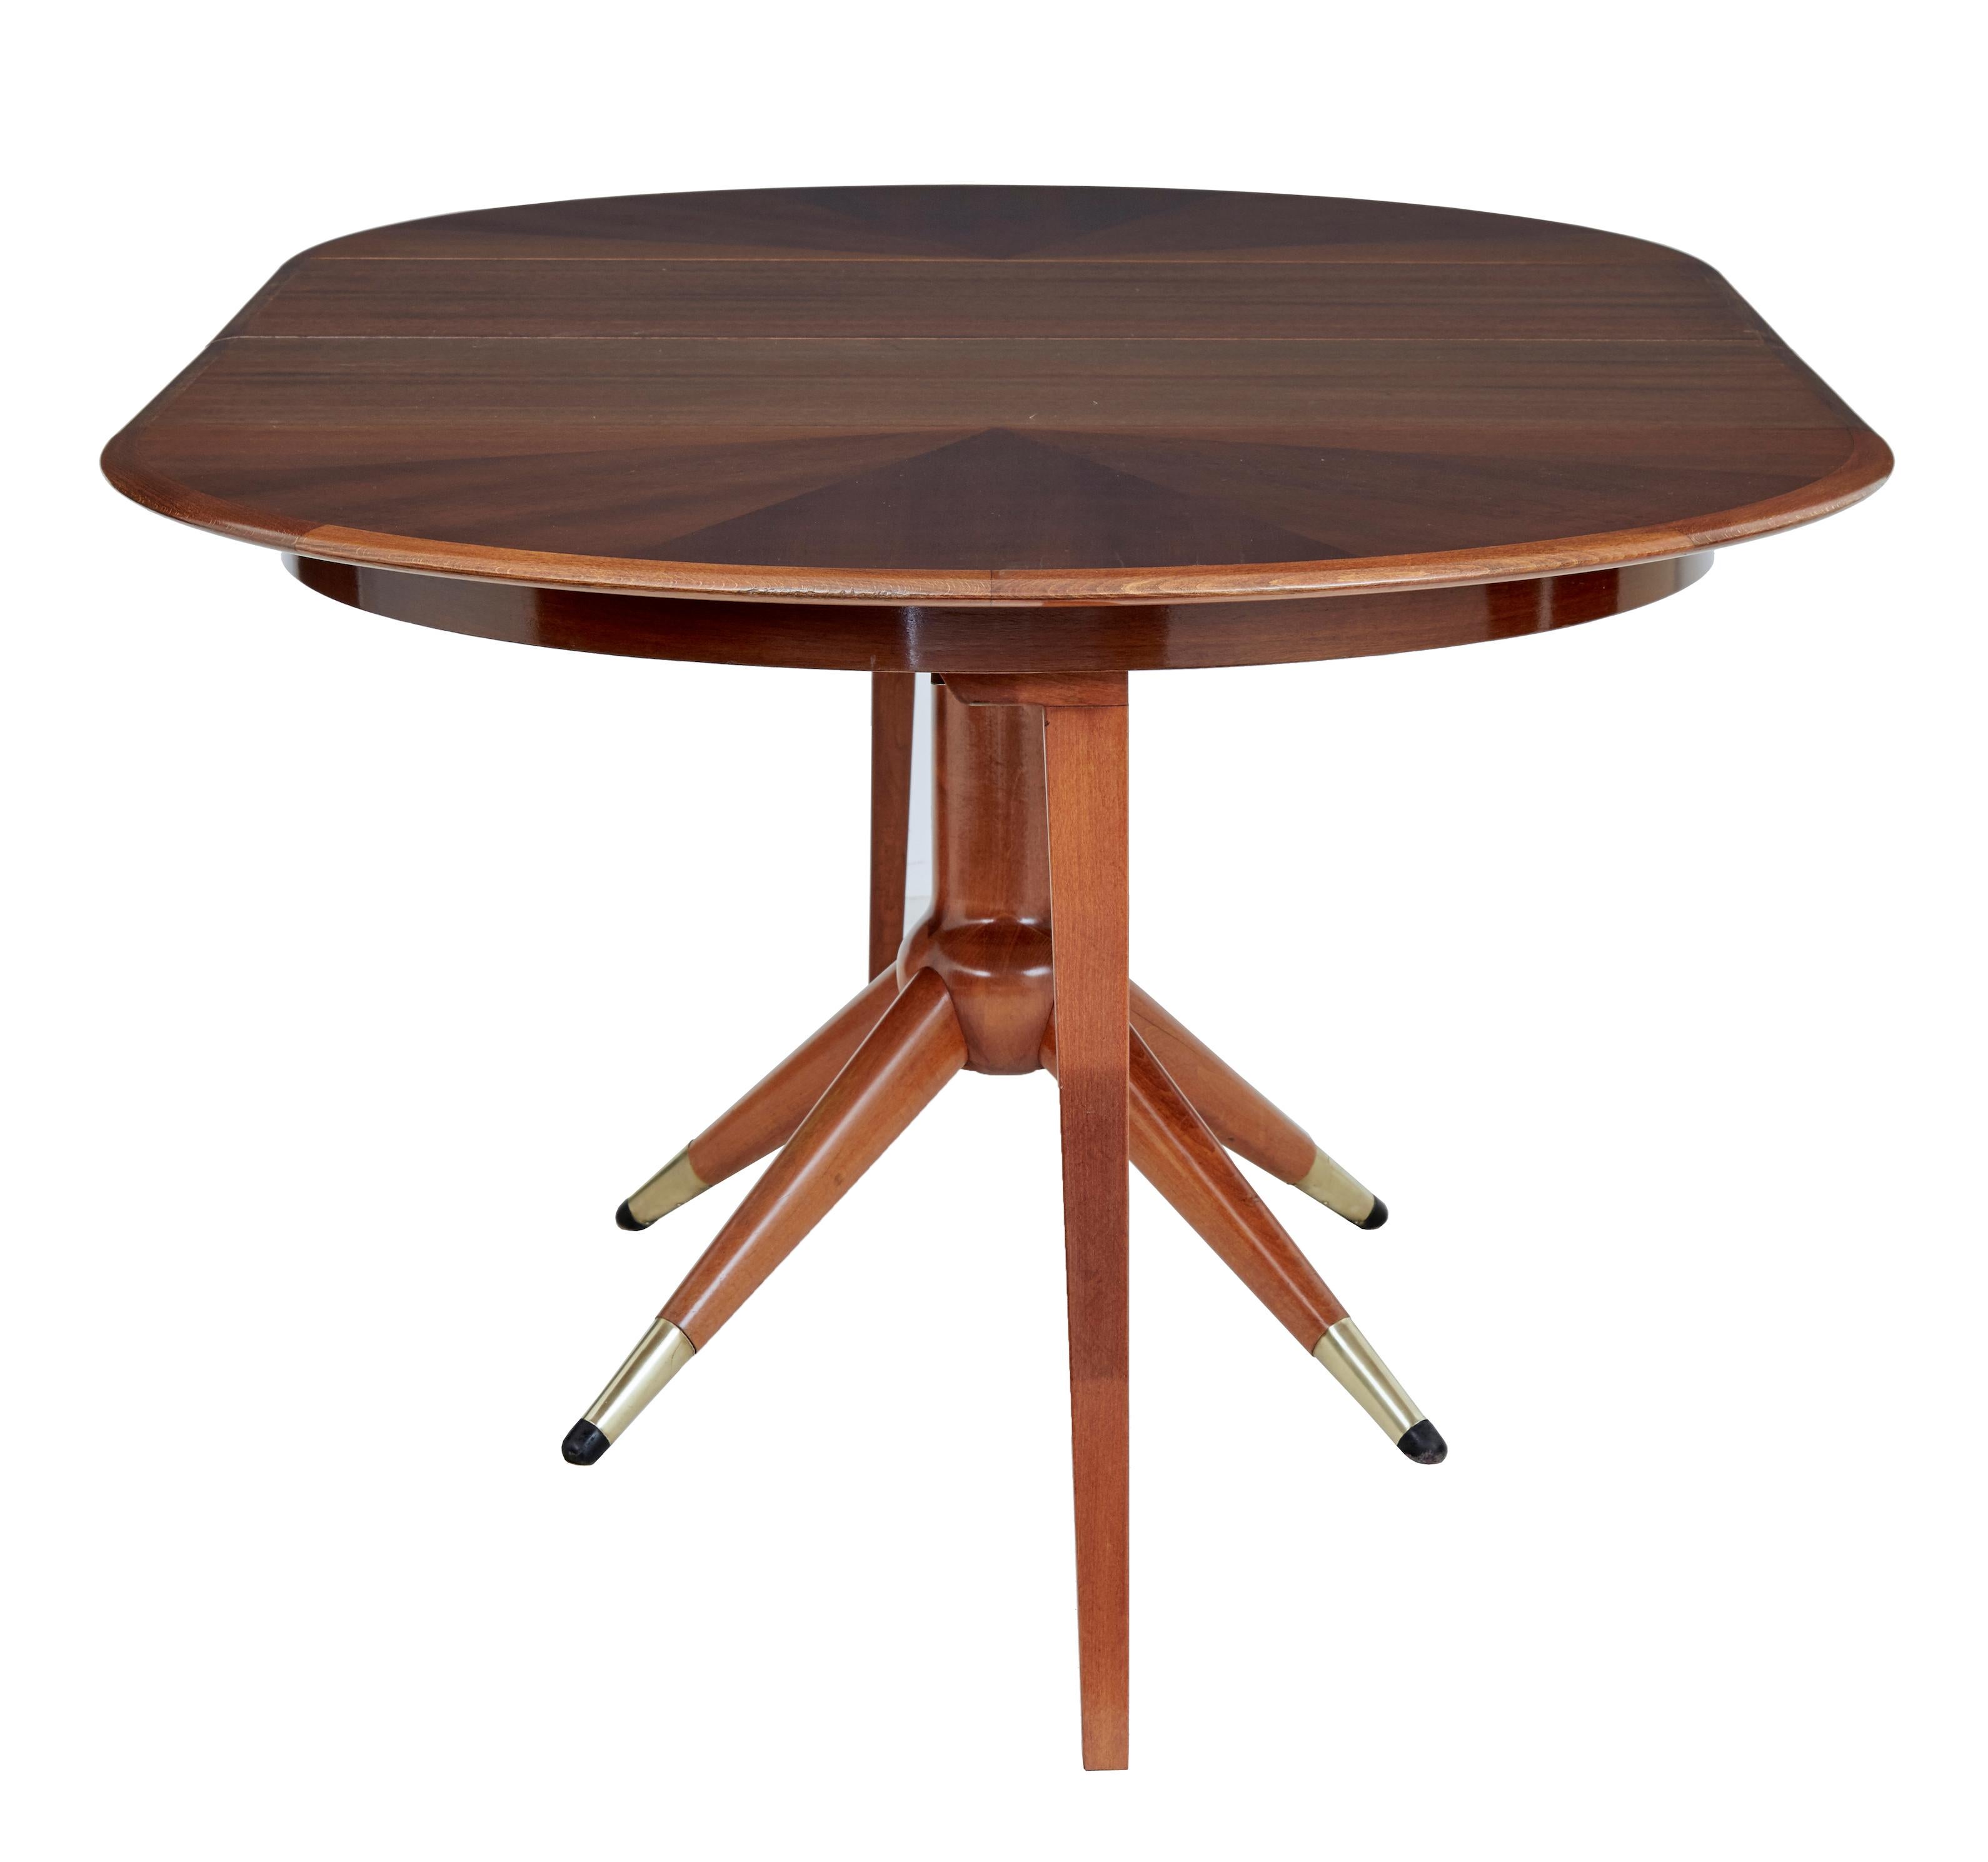 Mid-20th century extending teak dining table by David Rosen circa 1950.

Here we have a good example of the 'napoli' table designed by David Rosen for nordiska kompaniet.

Circular segmented veneered top with solid teak edge, supplied with 2